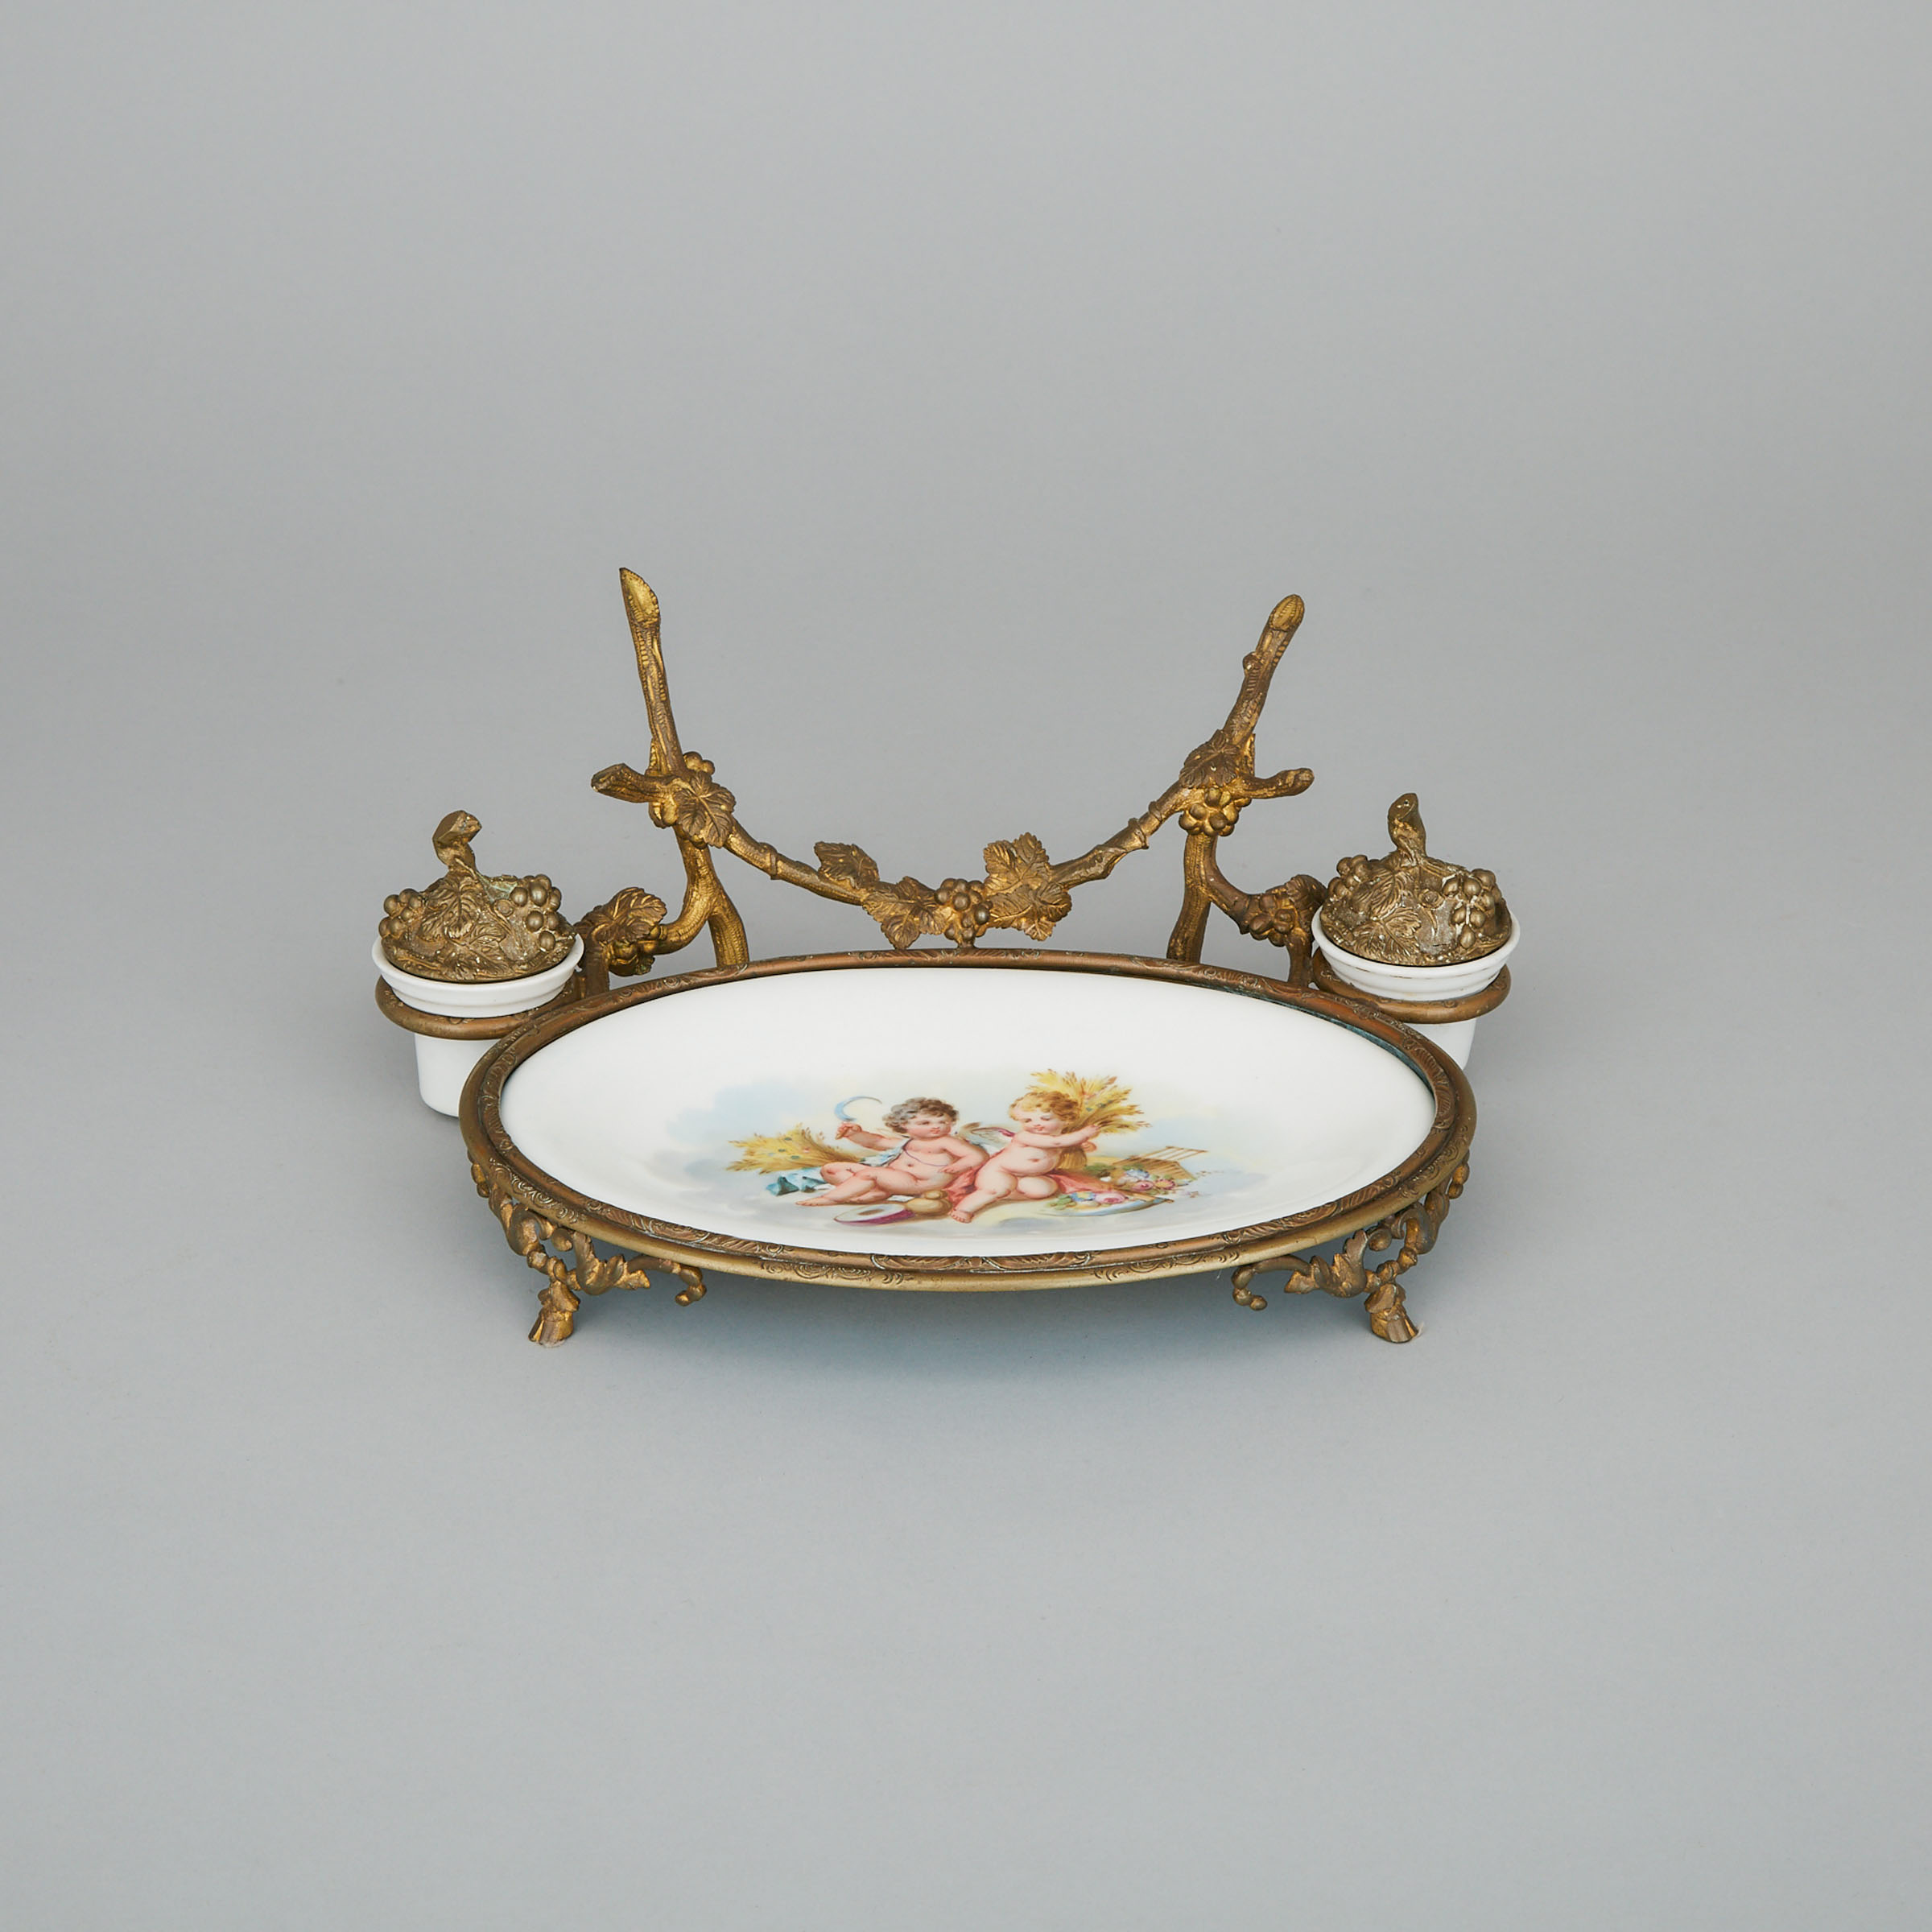 French Sevres Style Porcelain Mounted Gilt Bronze Standish, 19th century